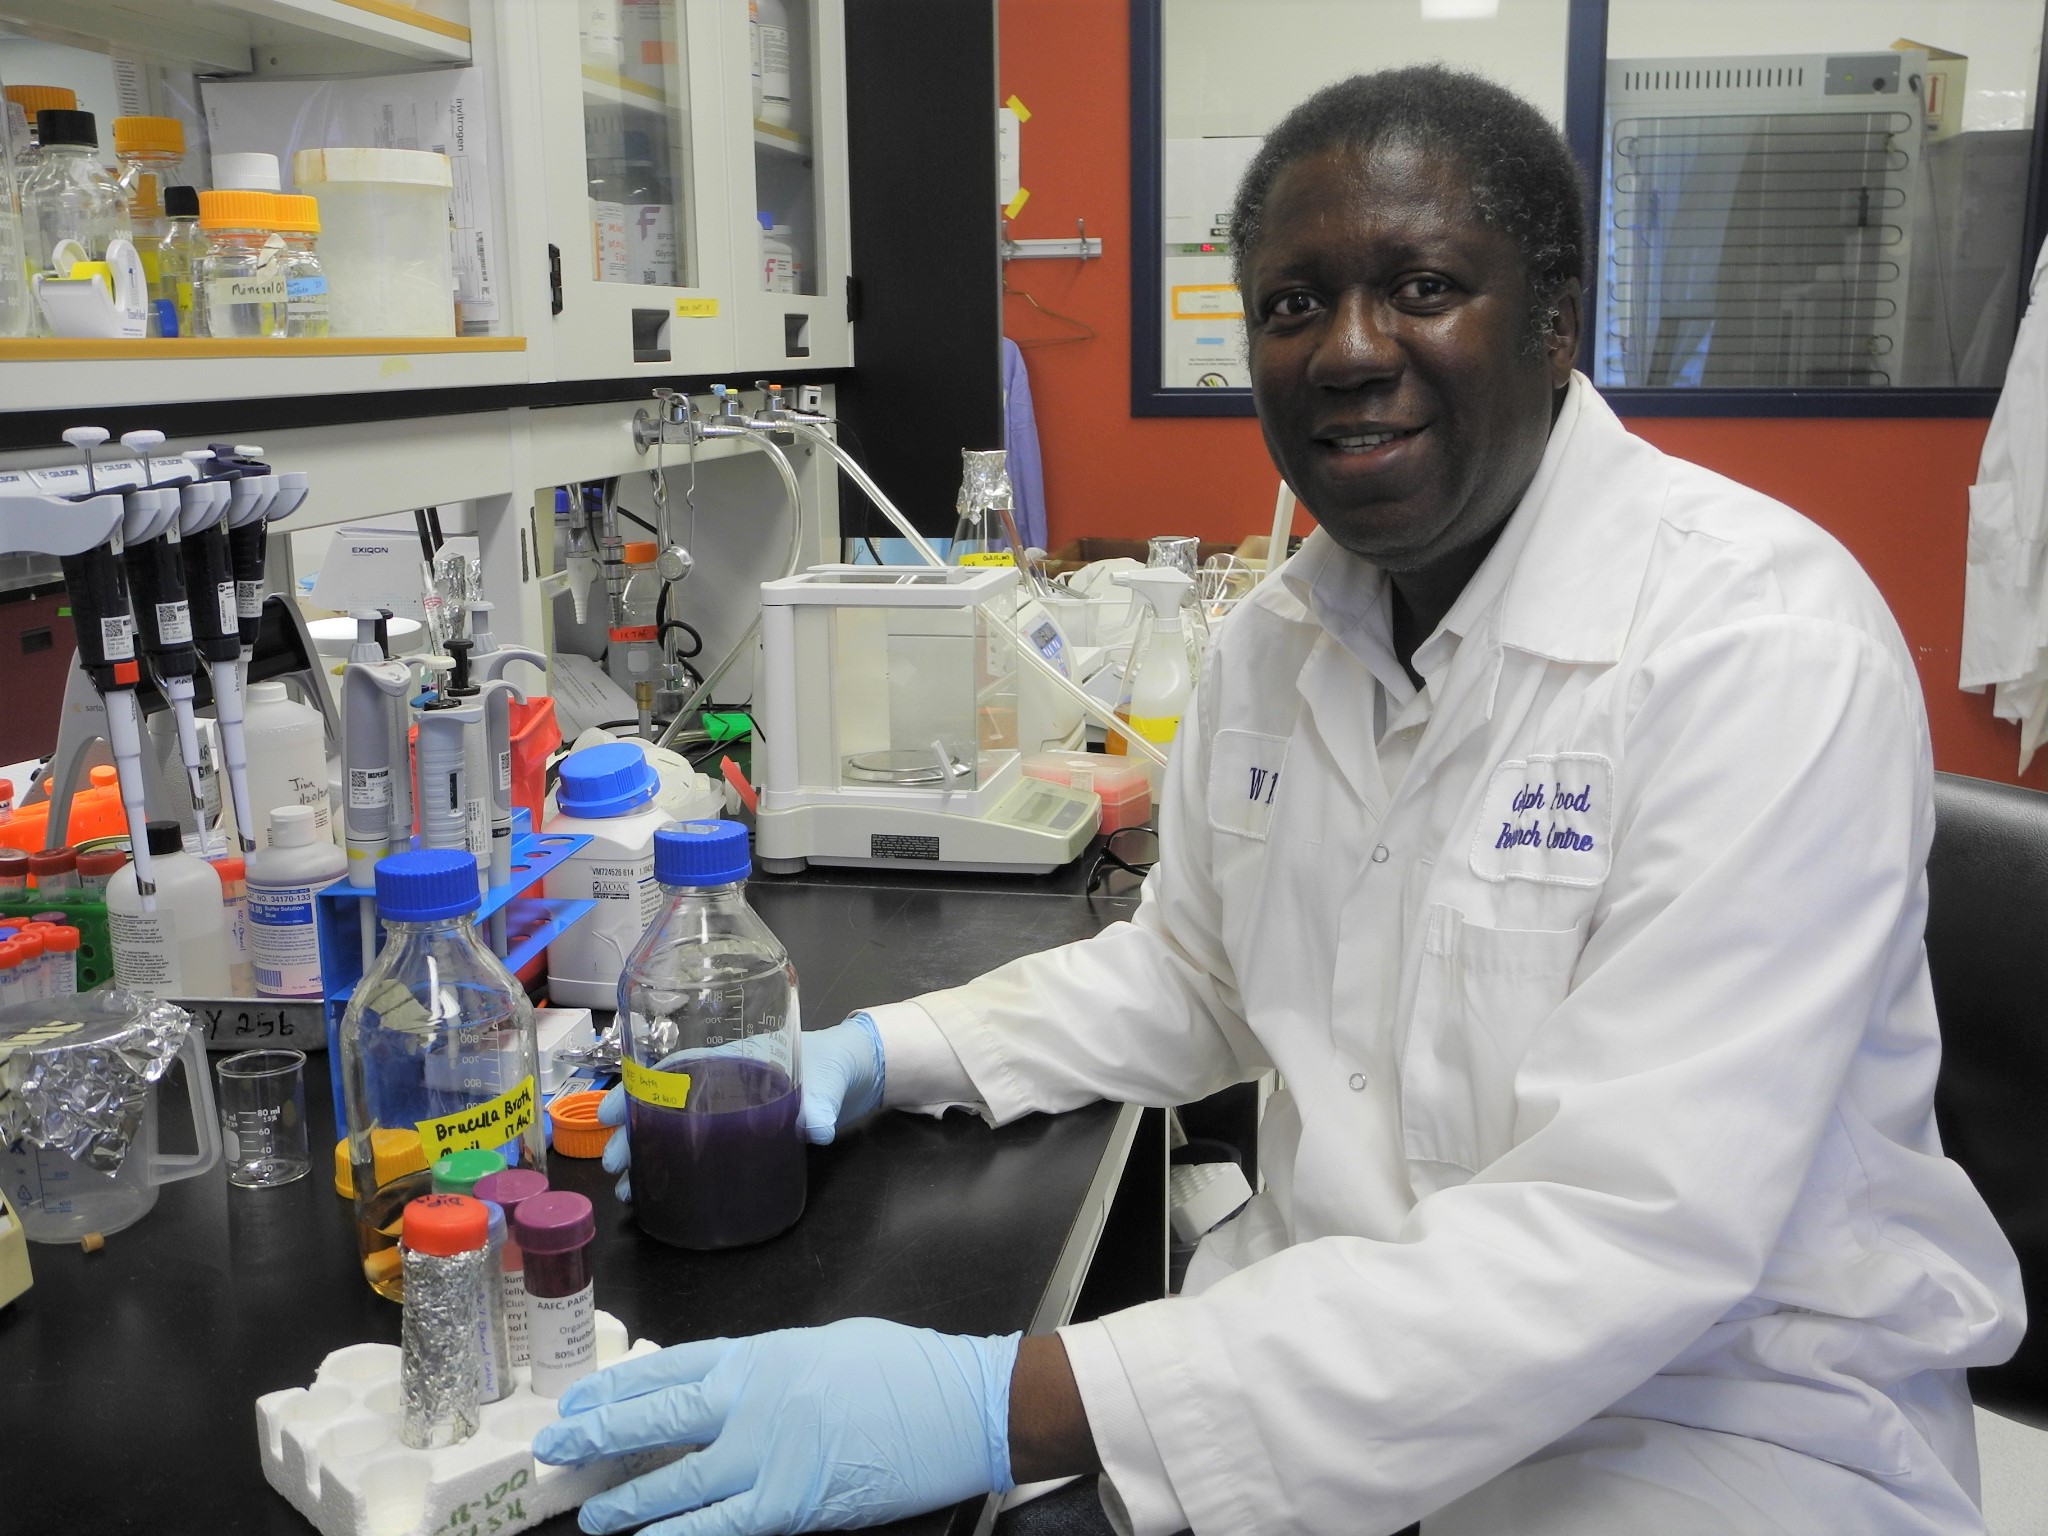 Dr. Moussa Diarra in the Guelph AAFC laboratory